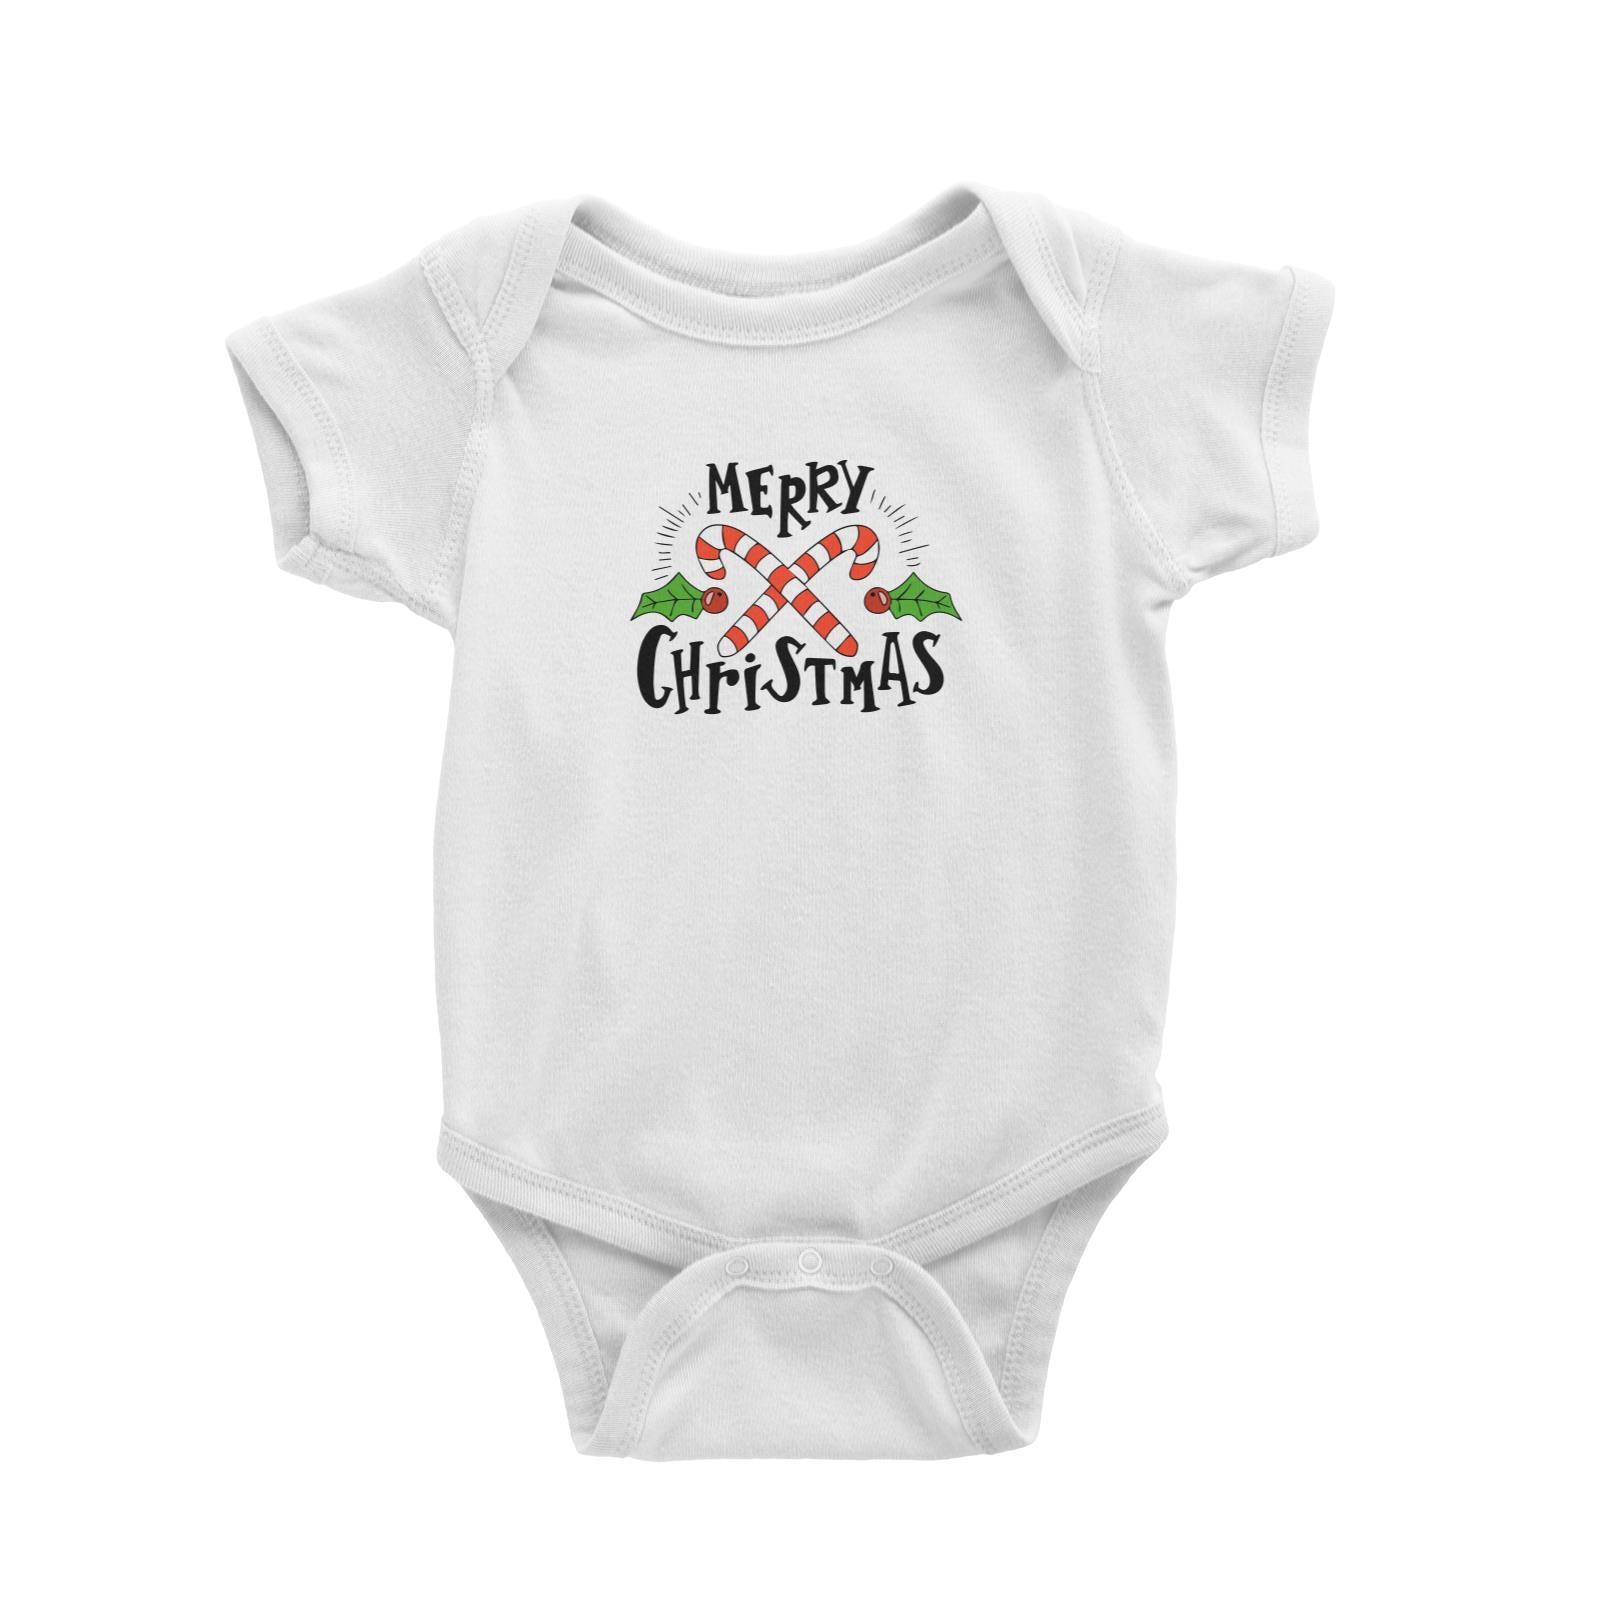 Merry Chrismas with Holly and Candy Cane Greeting Baby Romper Christmas Matching Family Lettering